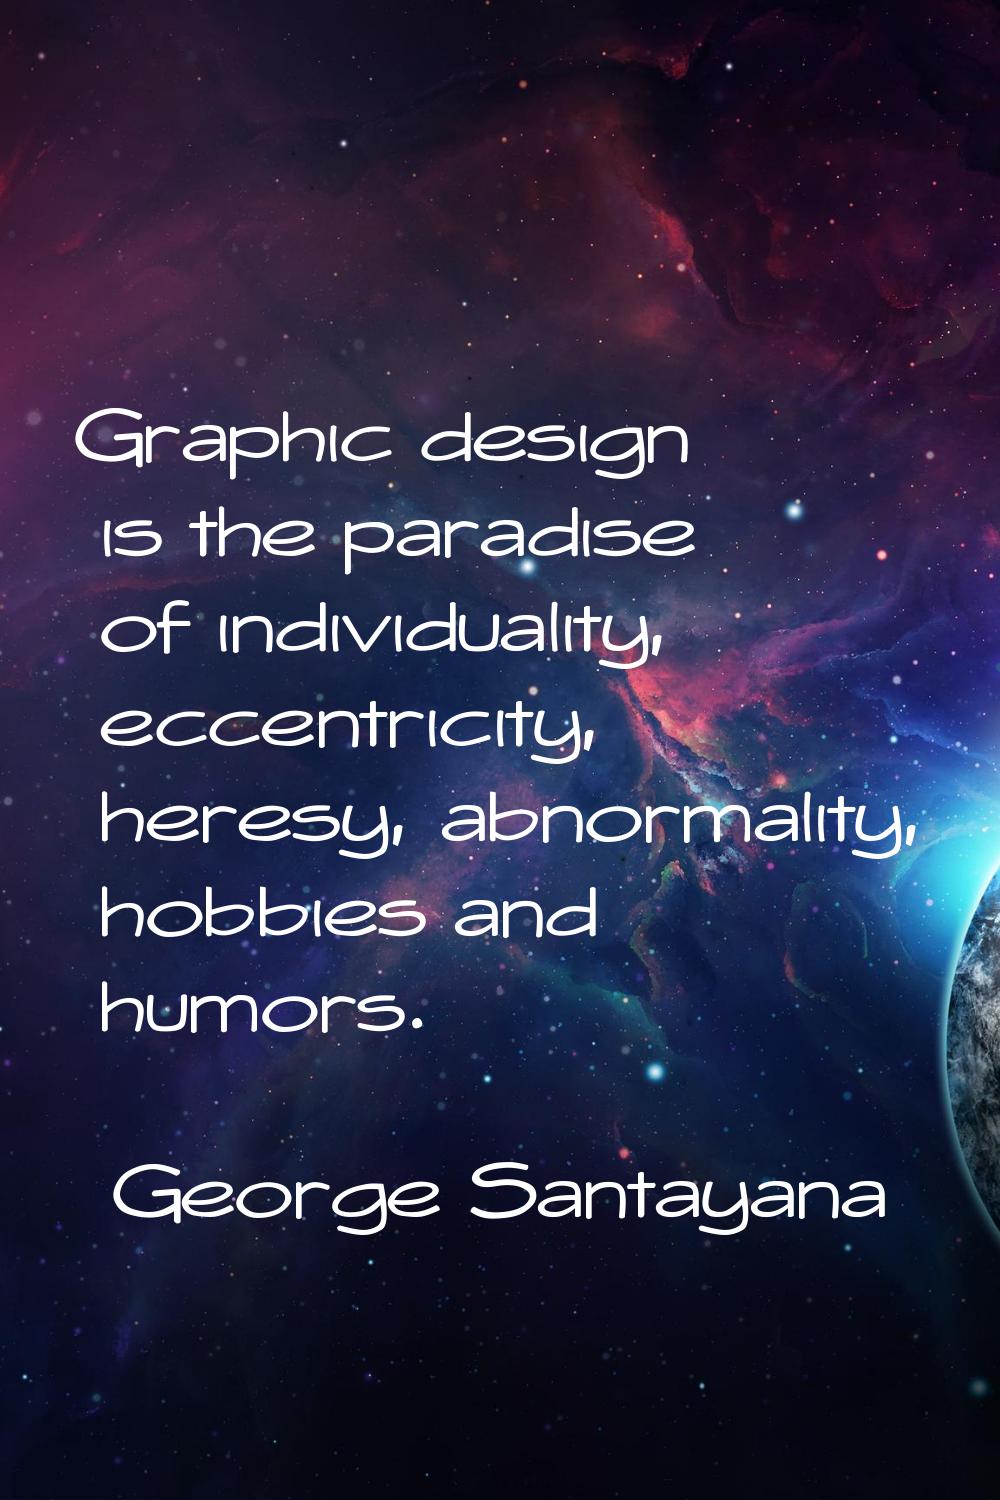 Graphic design is the paradise of individuality, eccentricity, heresy, abnormality, hobbies and hum